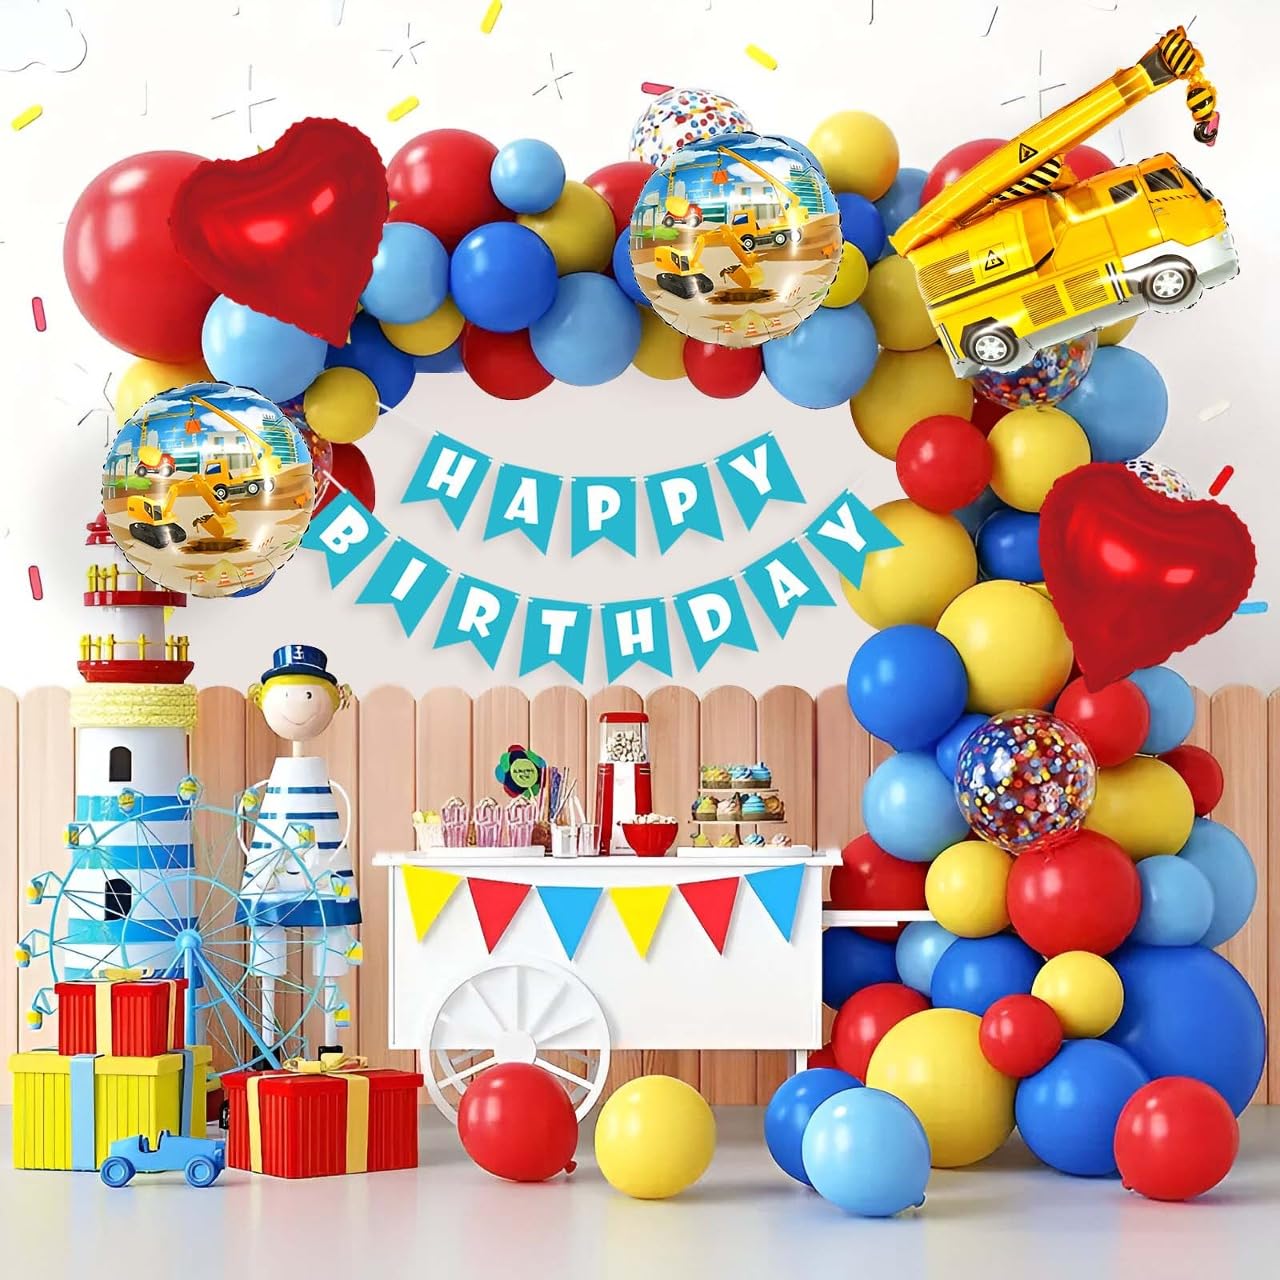 Decorate your B'day with Crane theme decor kit